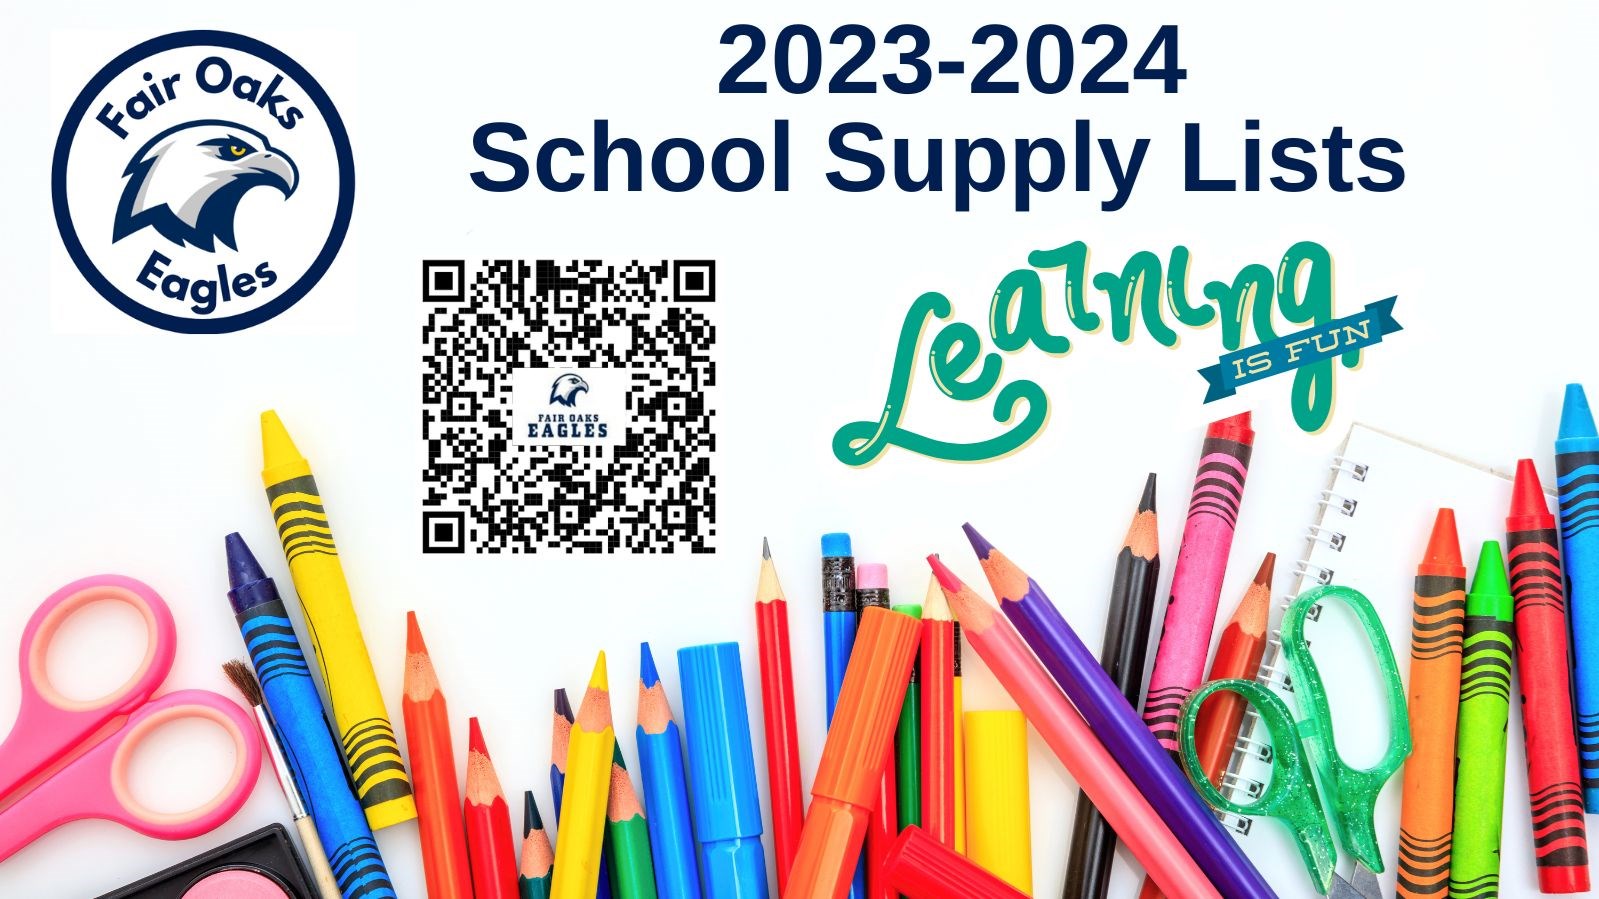 School Supply Lists for 2023-2024